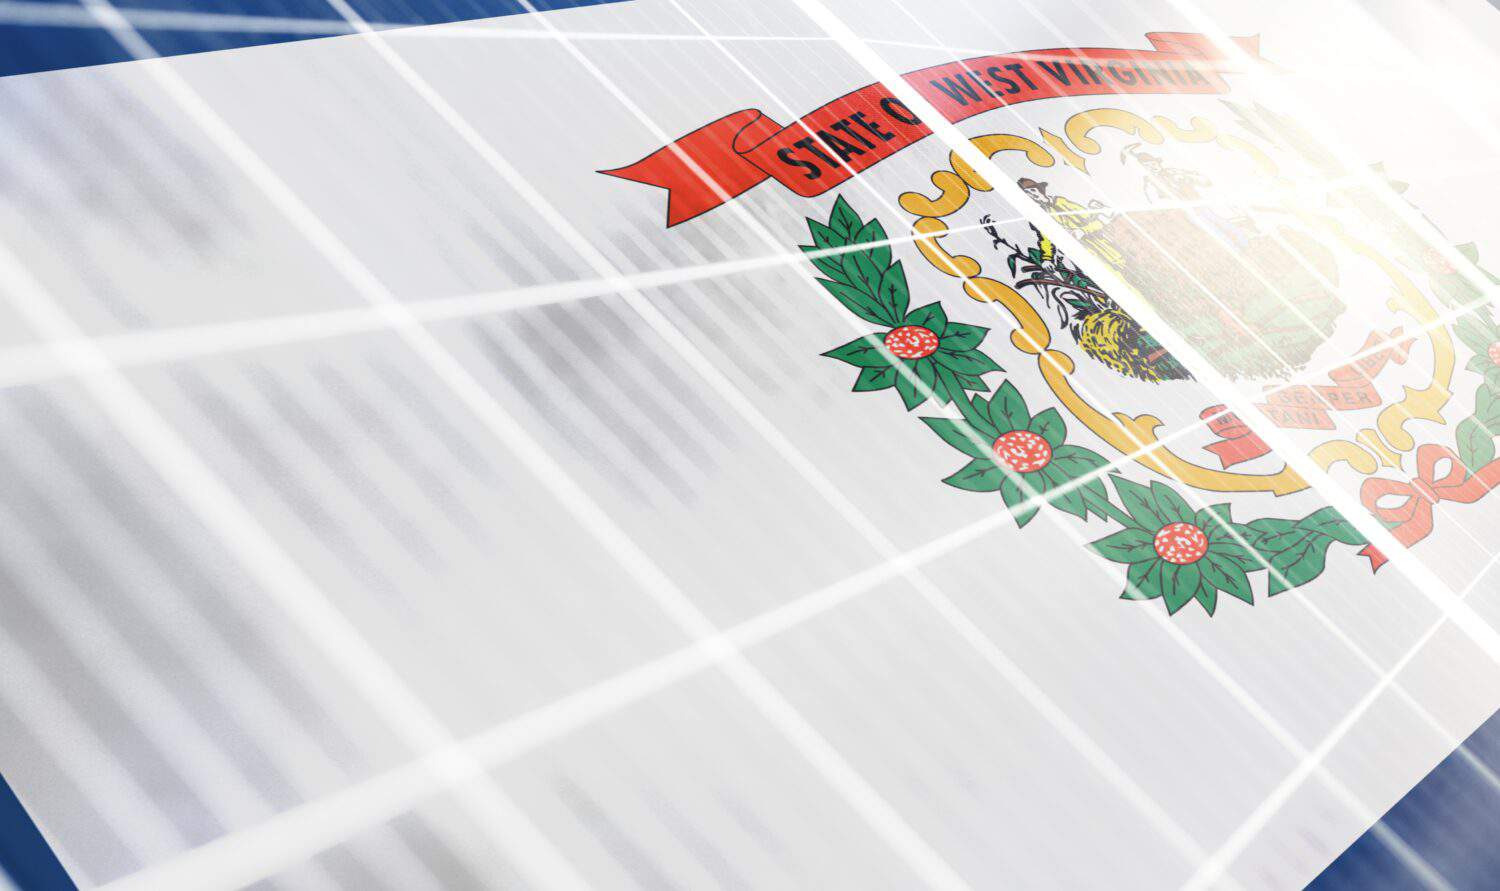 Solar panels on the background of the image of the flag of State of West Virginia